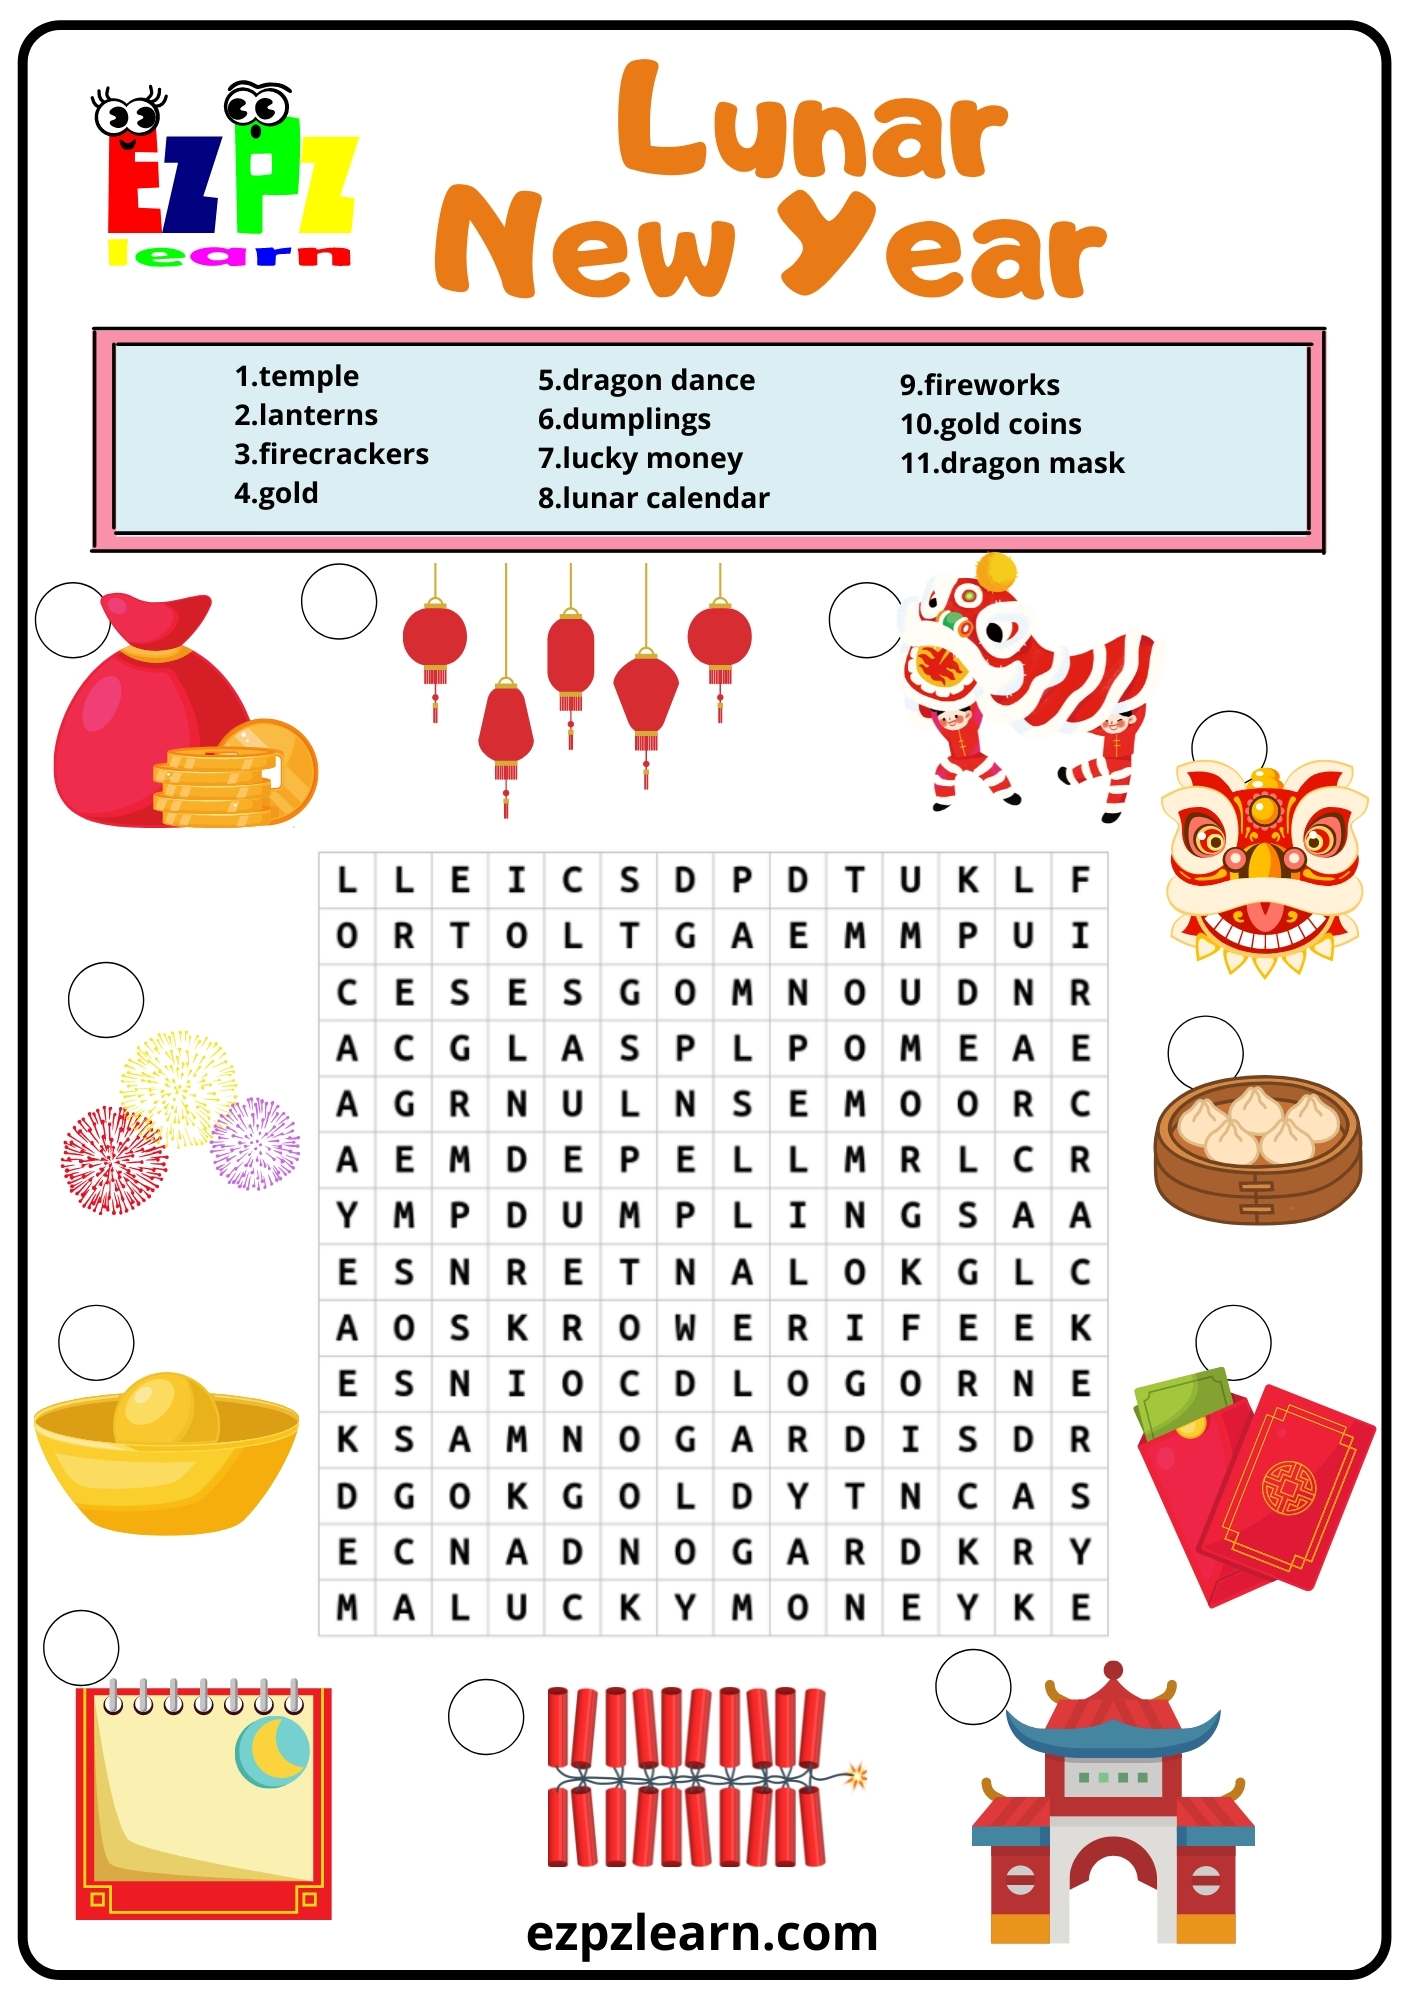 Lunar (Chinese) New Year Word Search